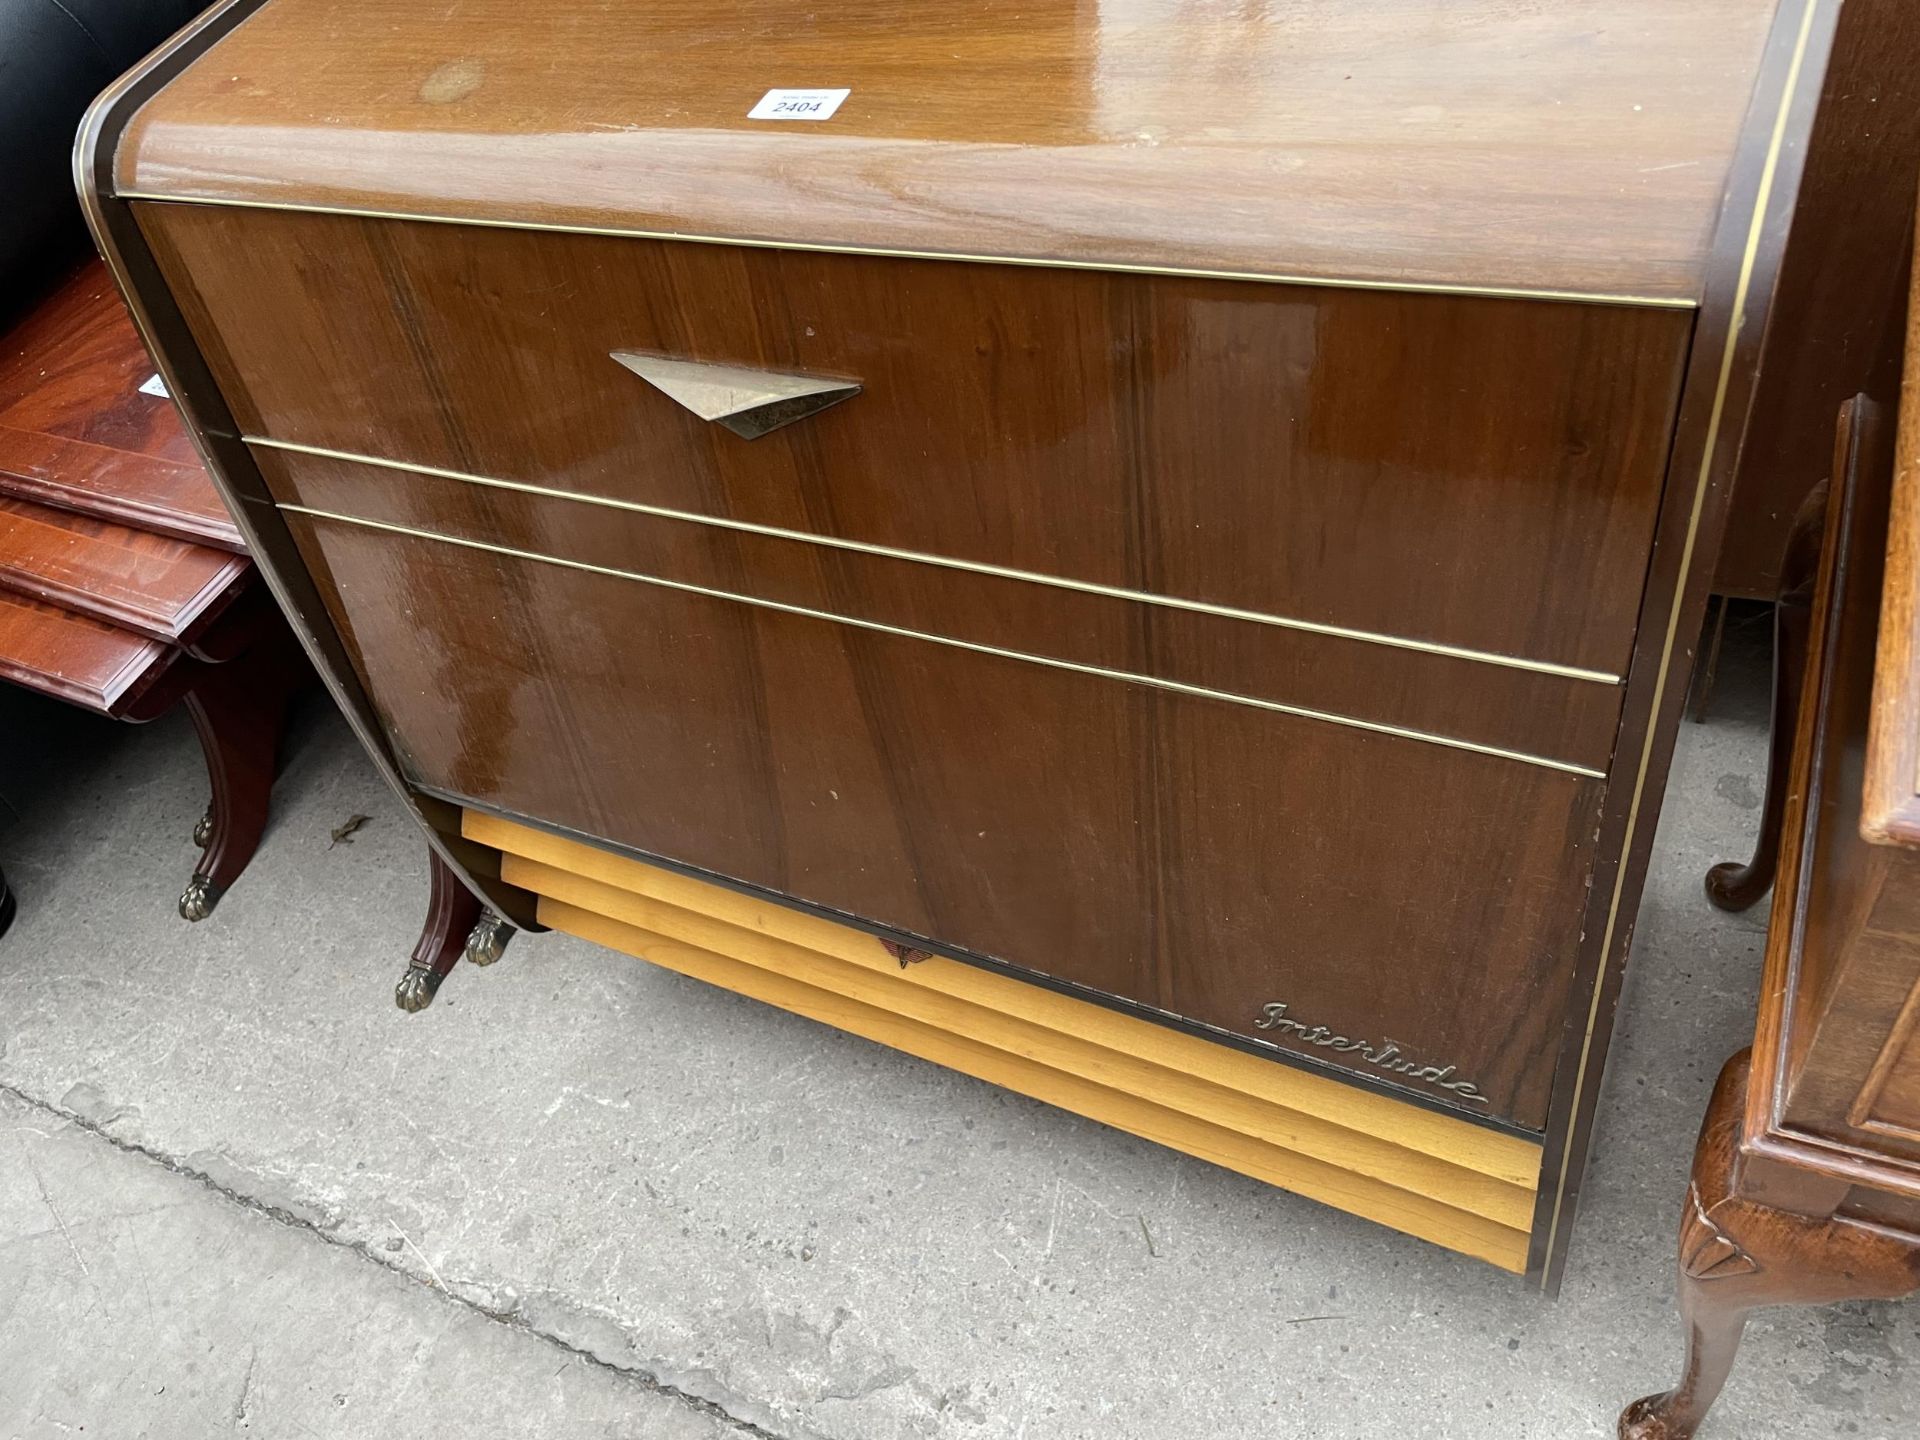 A STEROPHONIC RADIOGRAM, 31" WIDE - Image 4 of 5